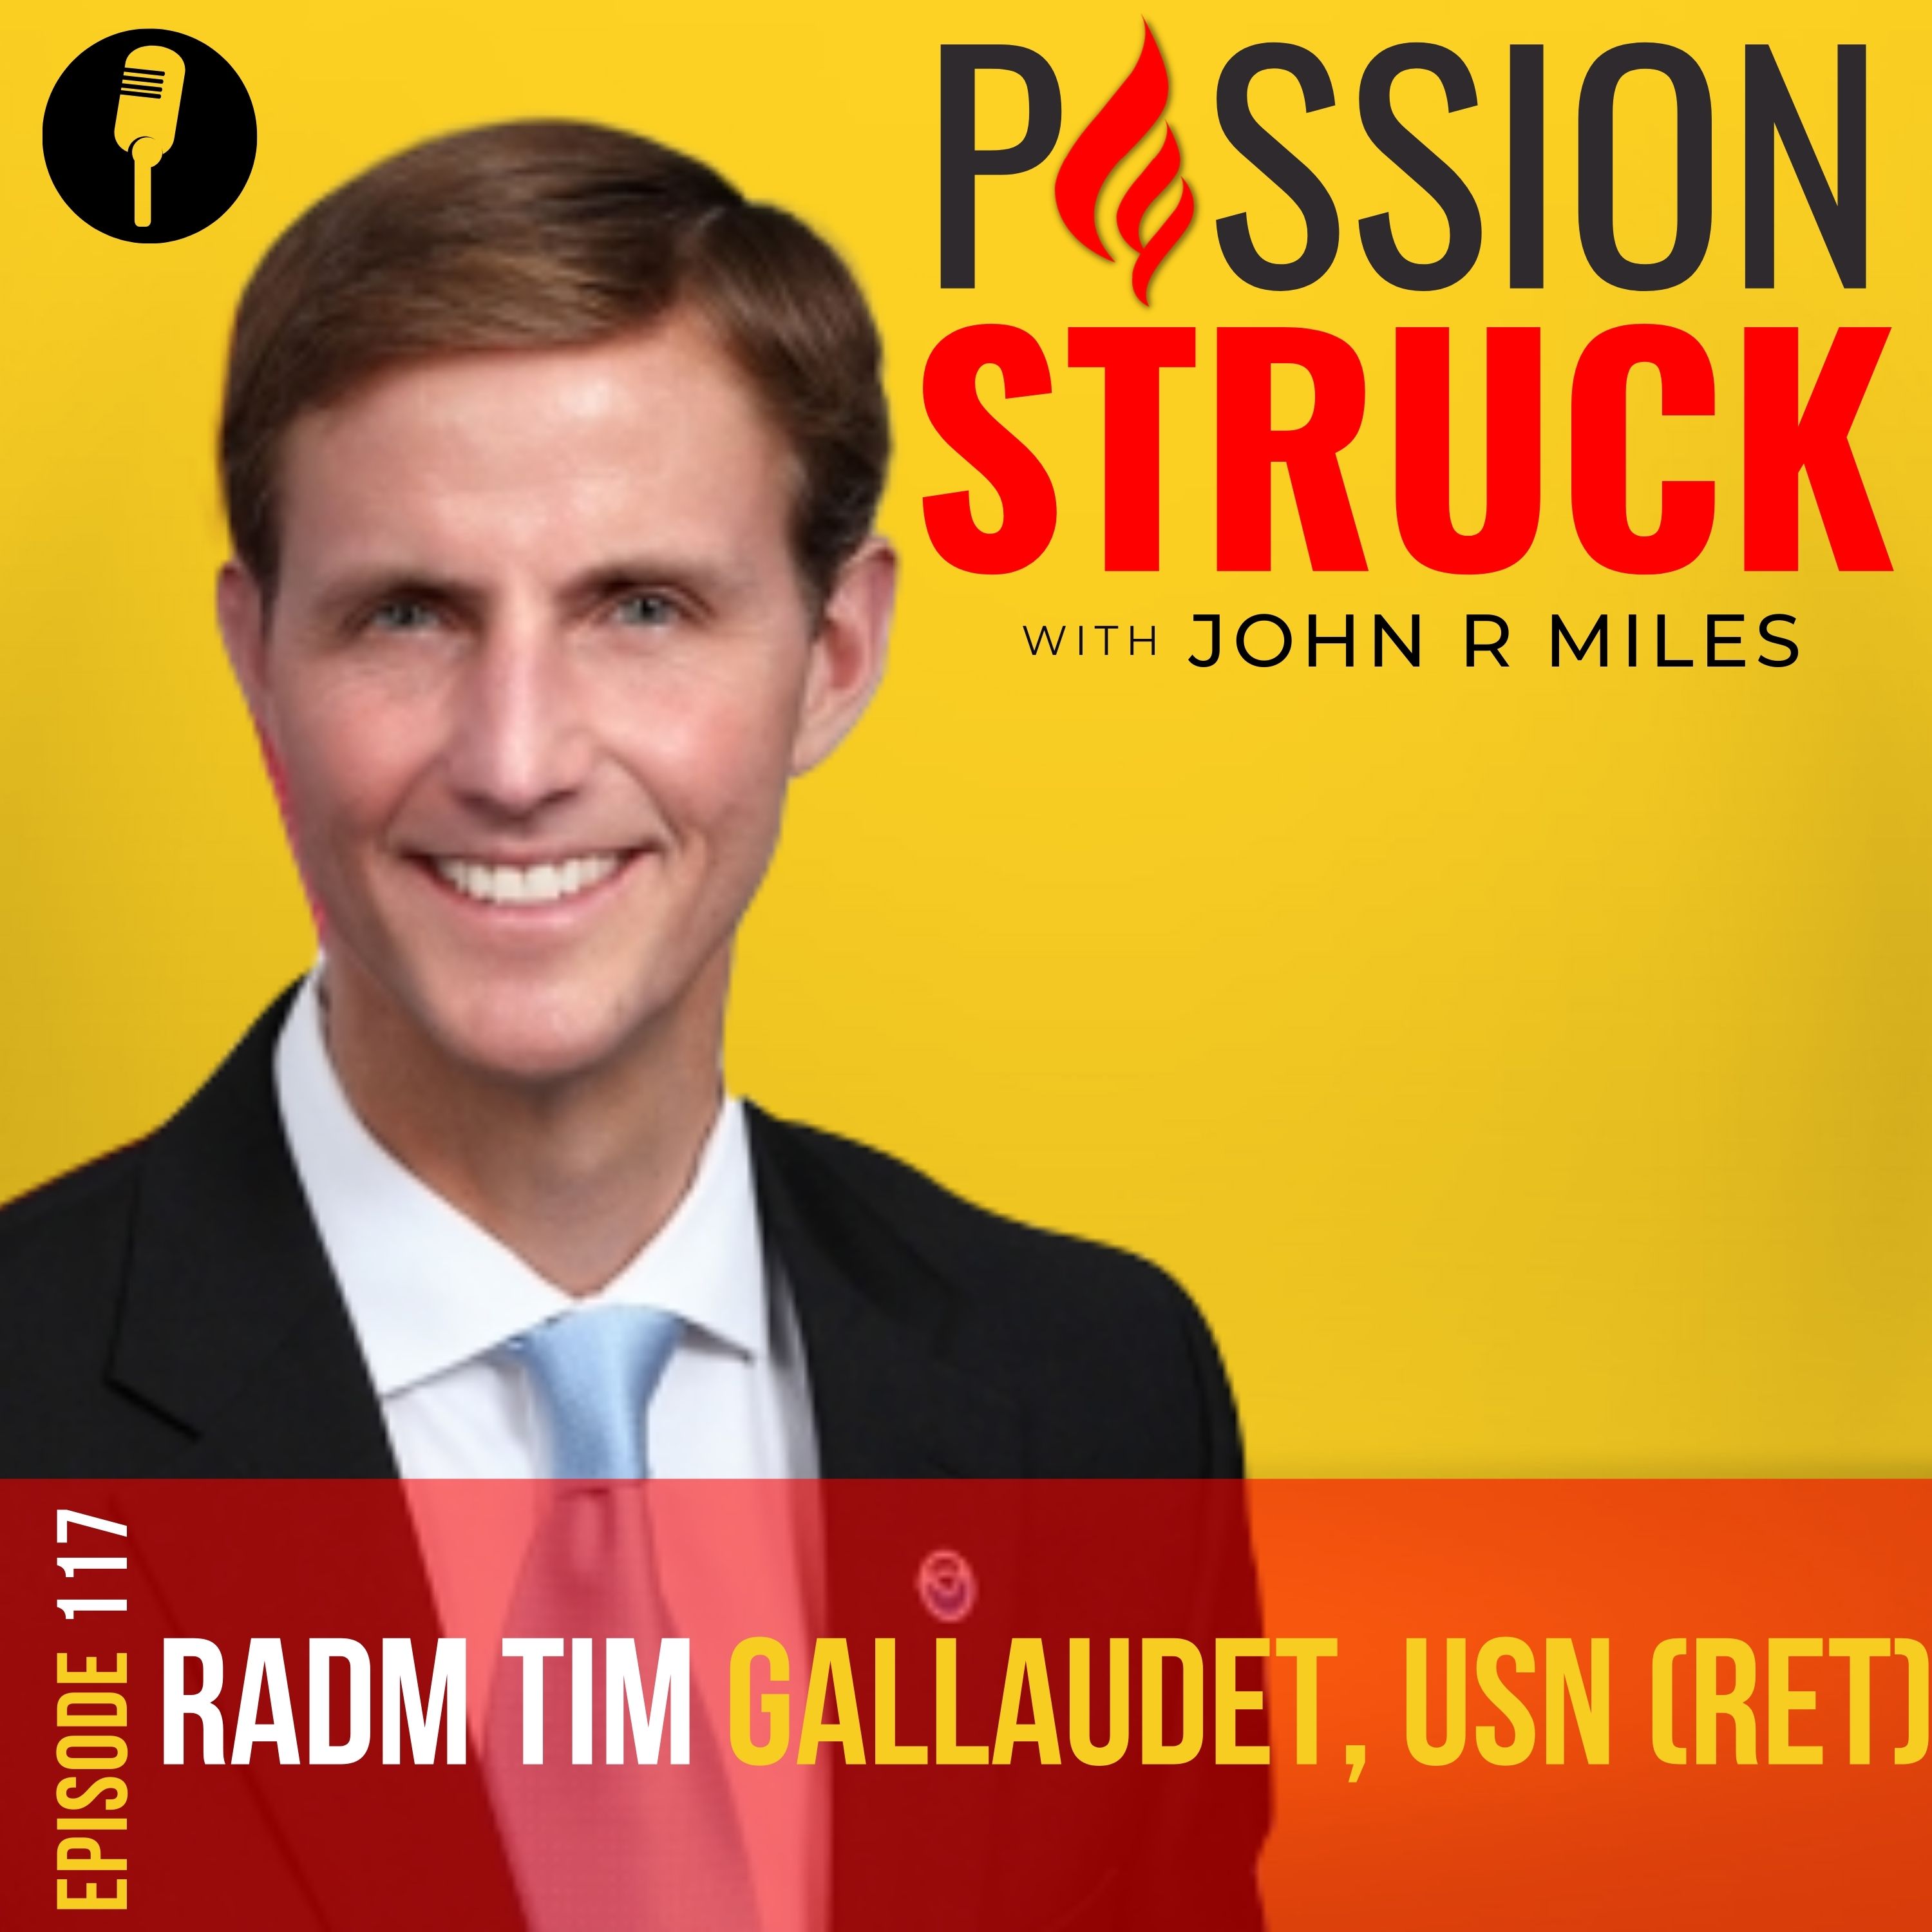 Passion Struck with John R. Miles album cover for episode 117 with Rear Admiral Tim Gallaudet